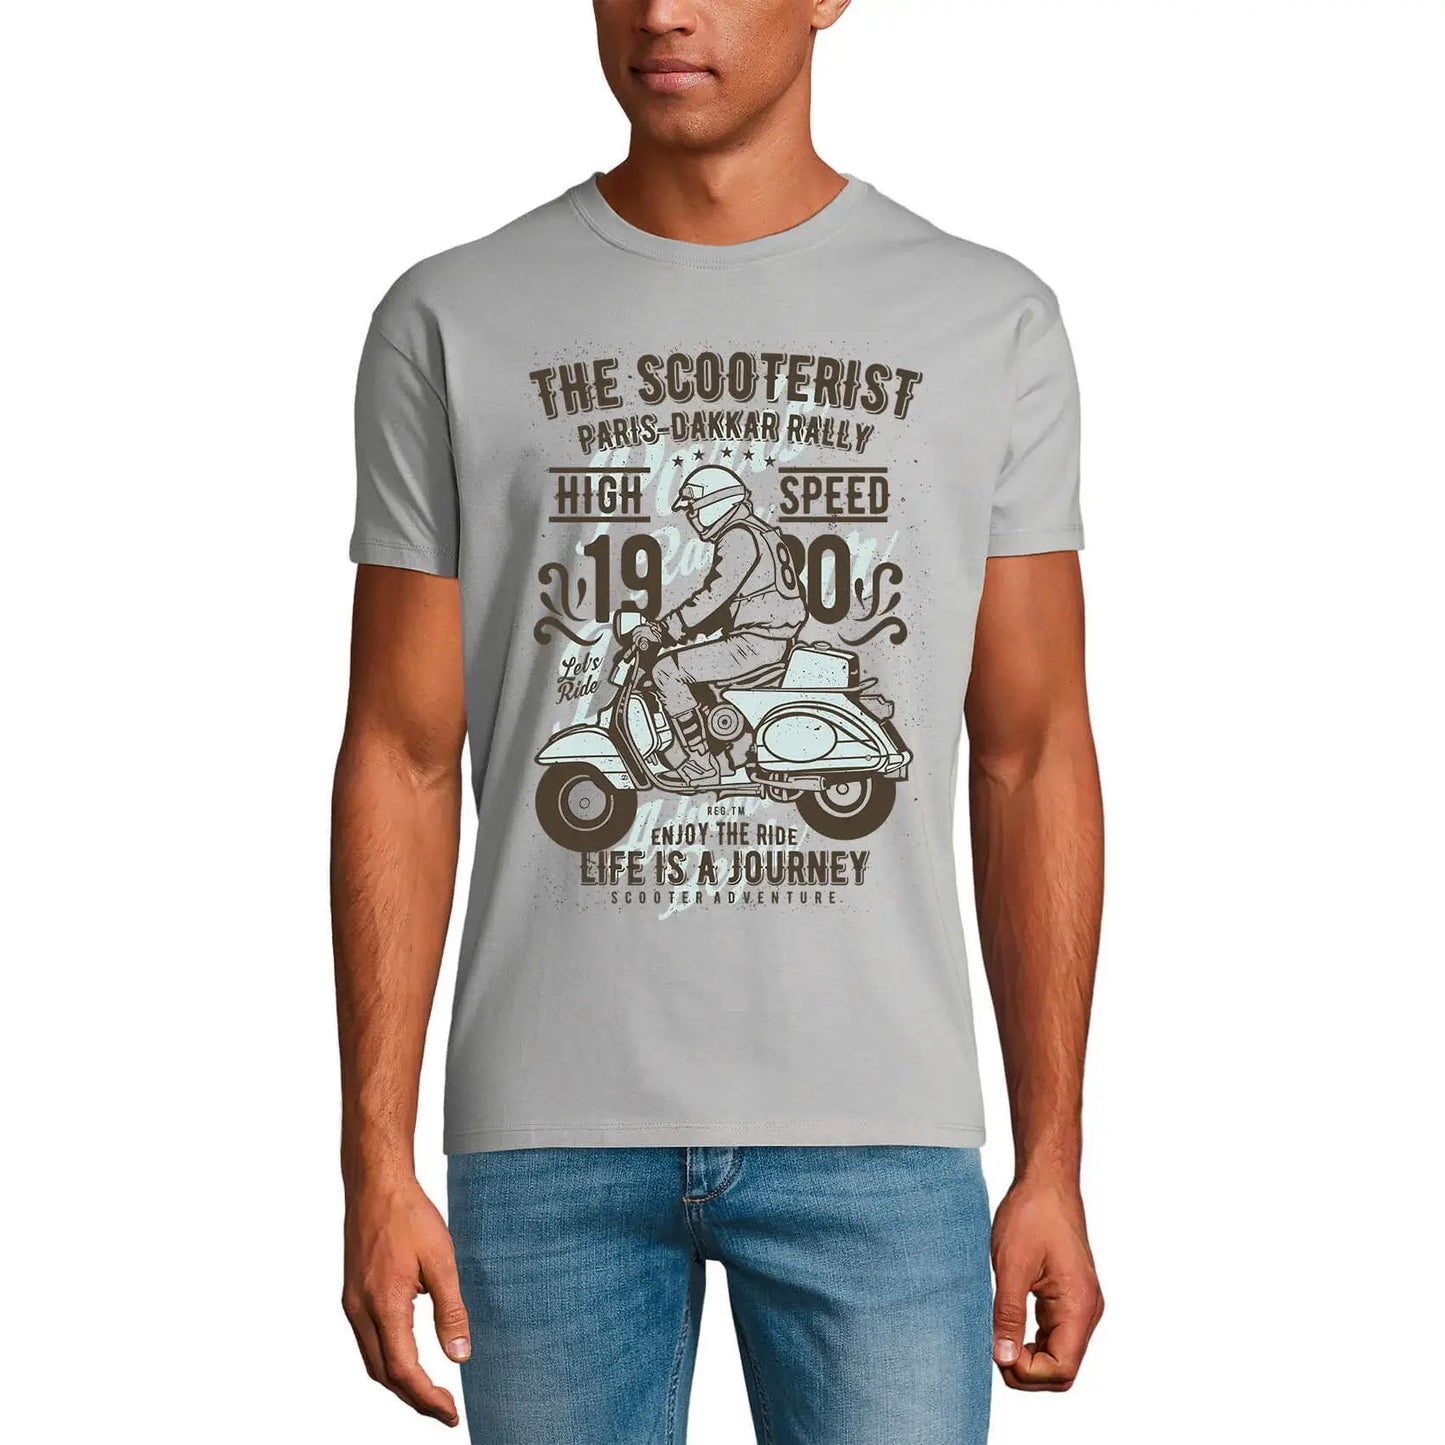 Men's Graphic T-Shirt The Scooterist Rally - Adventure Journey Ride Eco-Friendly Limited Edition Short Sleeve Tee-Shirt Vintage Birthday Gift Novelty